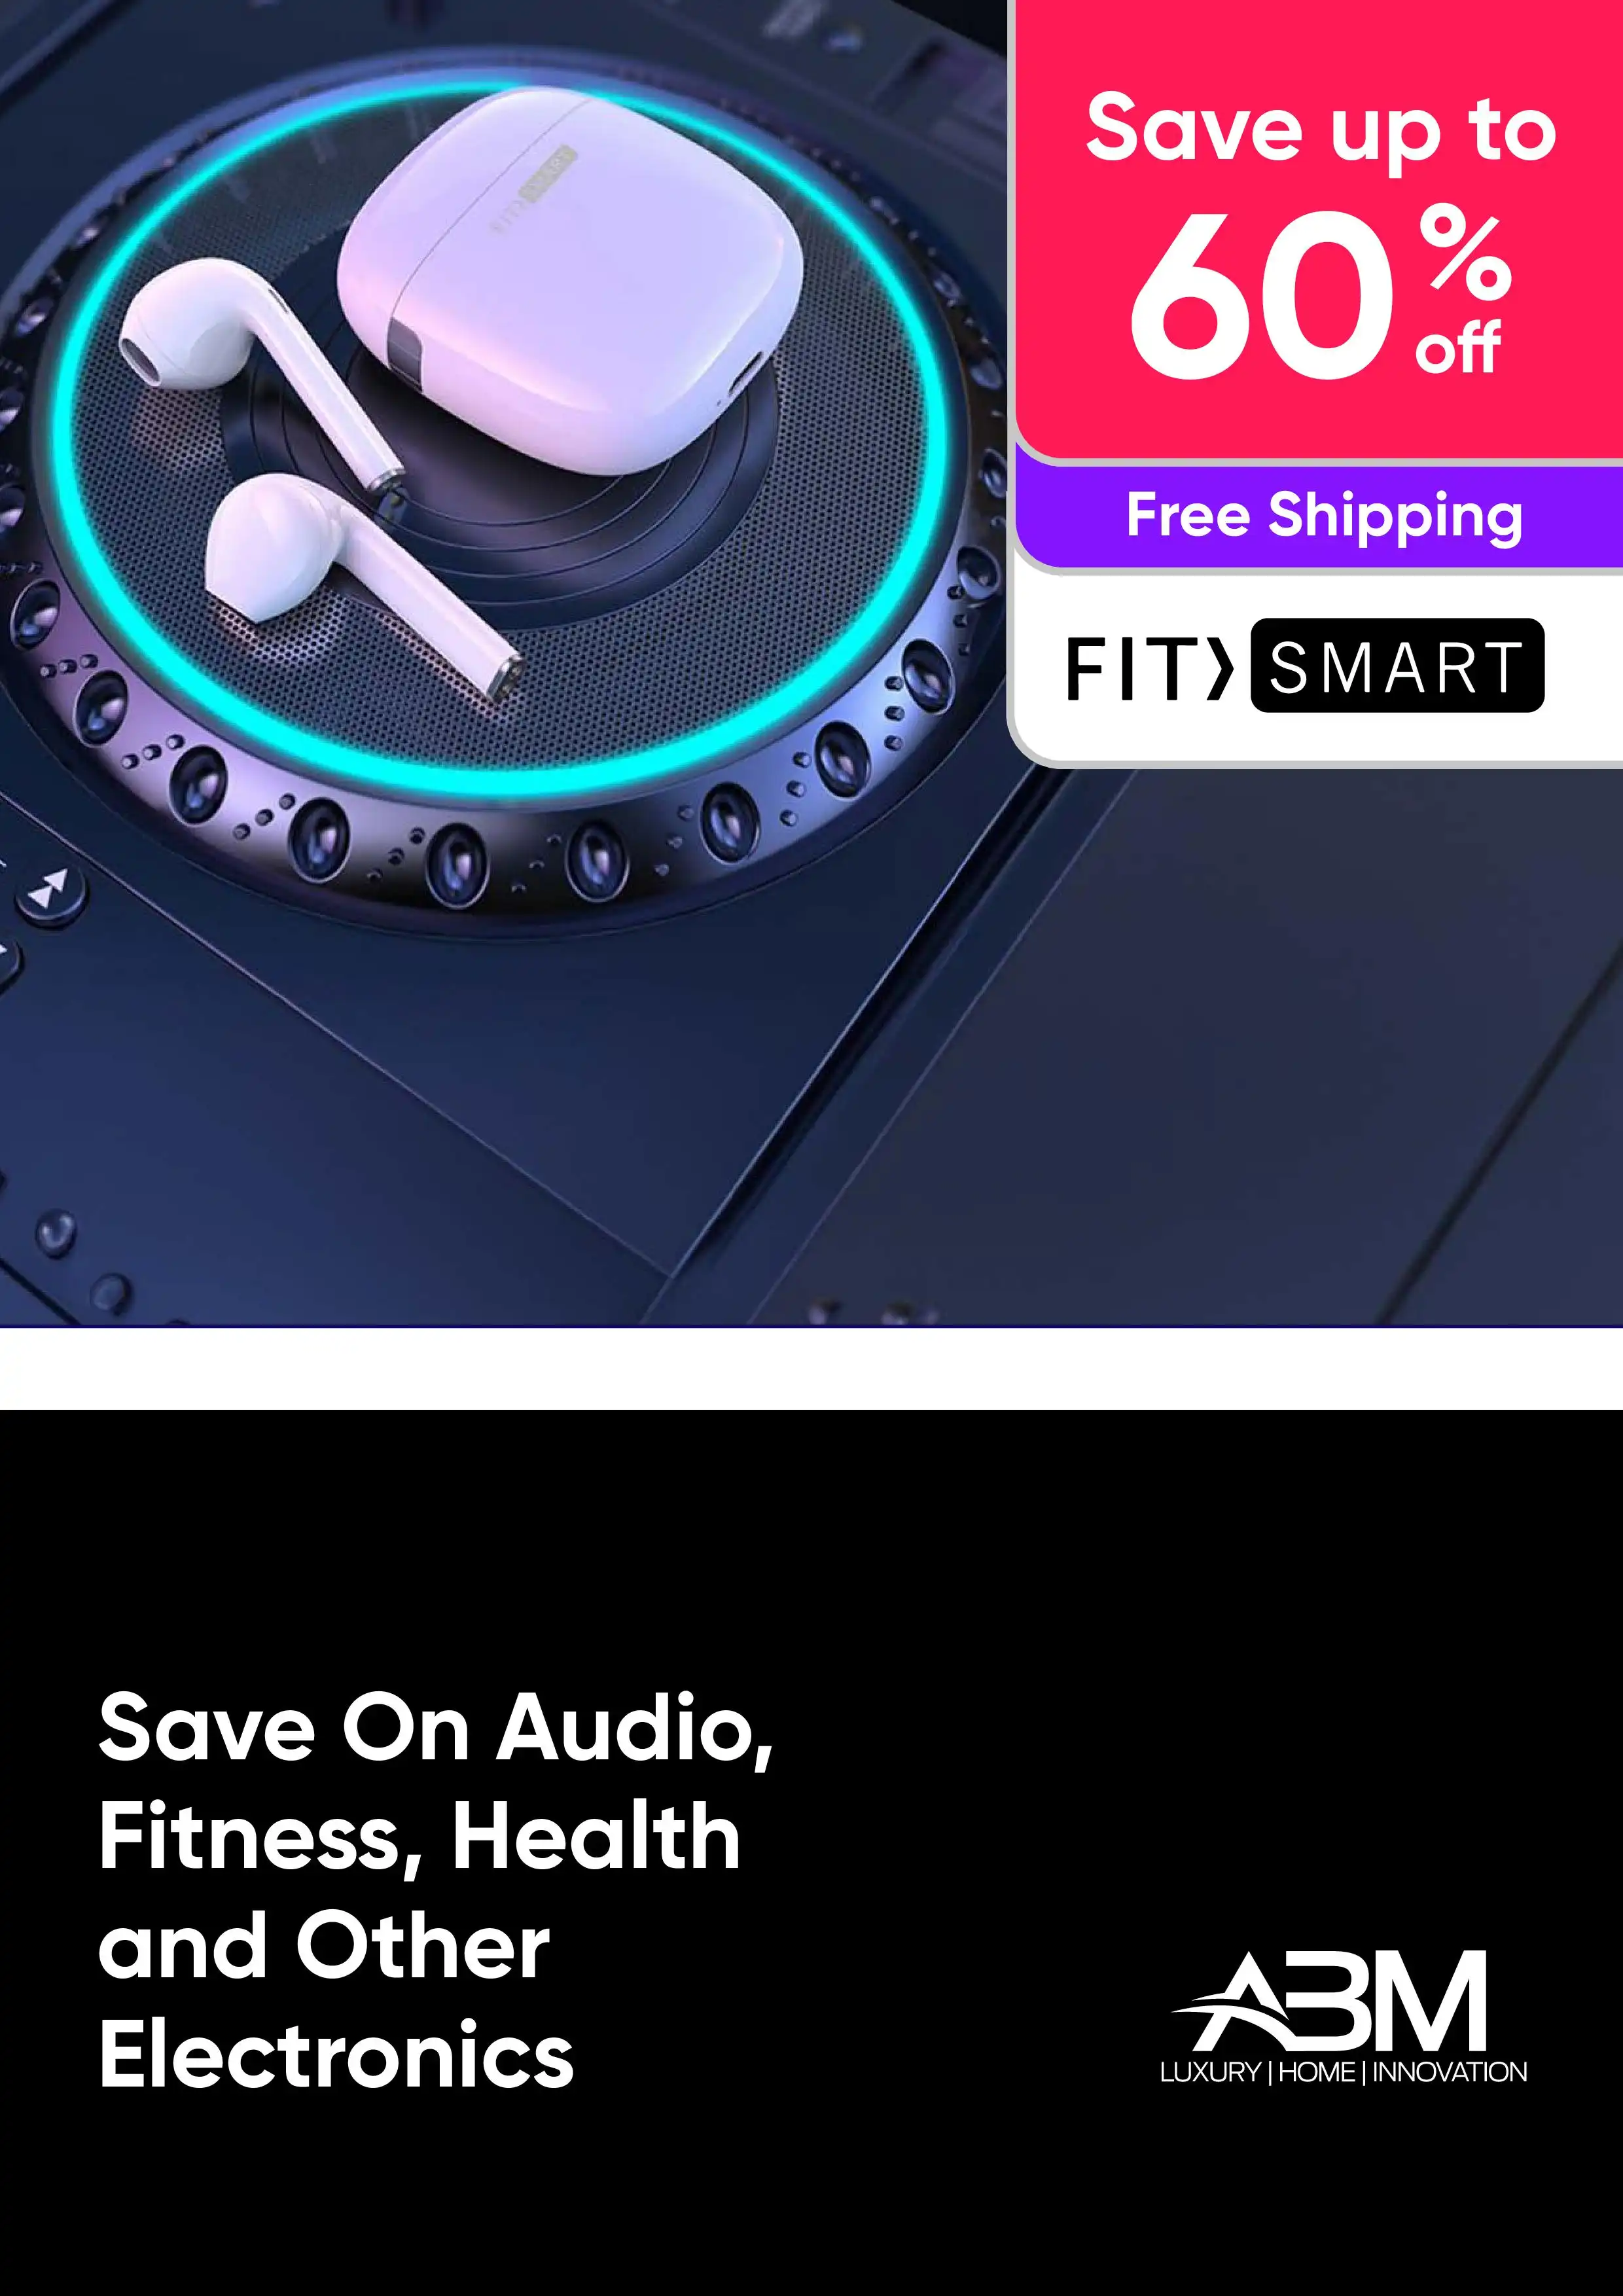 Electronics Specials - Save On Audio, Fitness, Health and Other Electronics